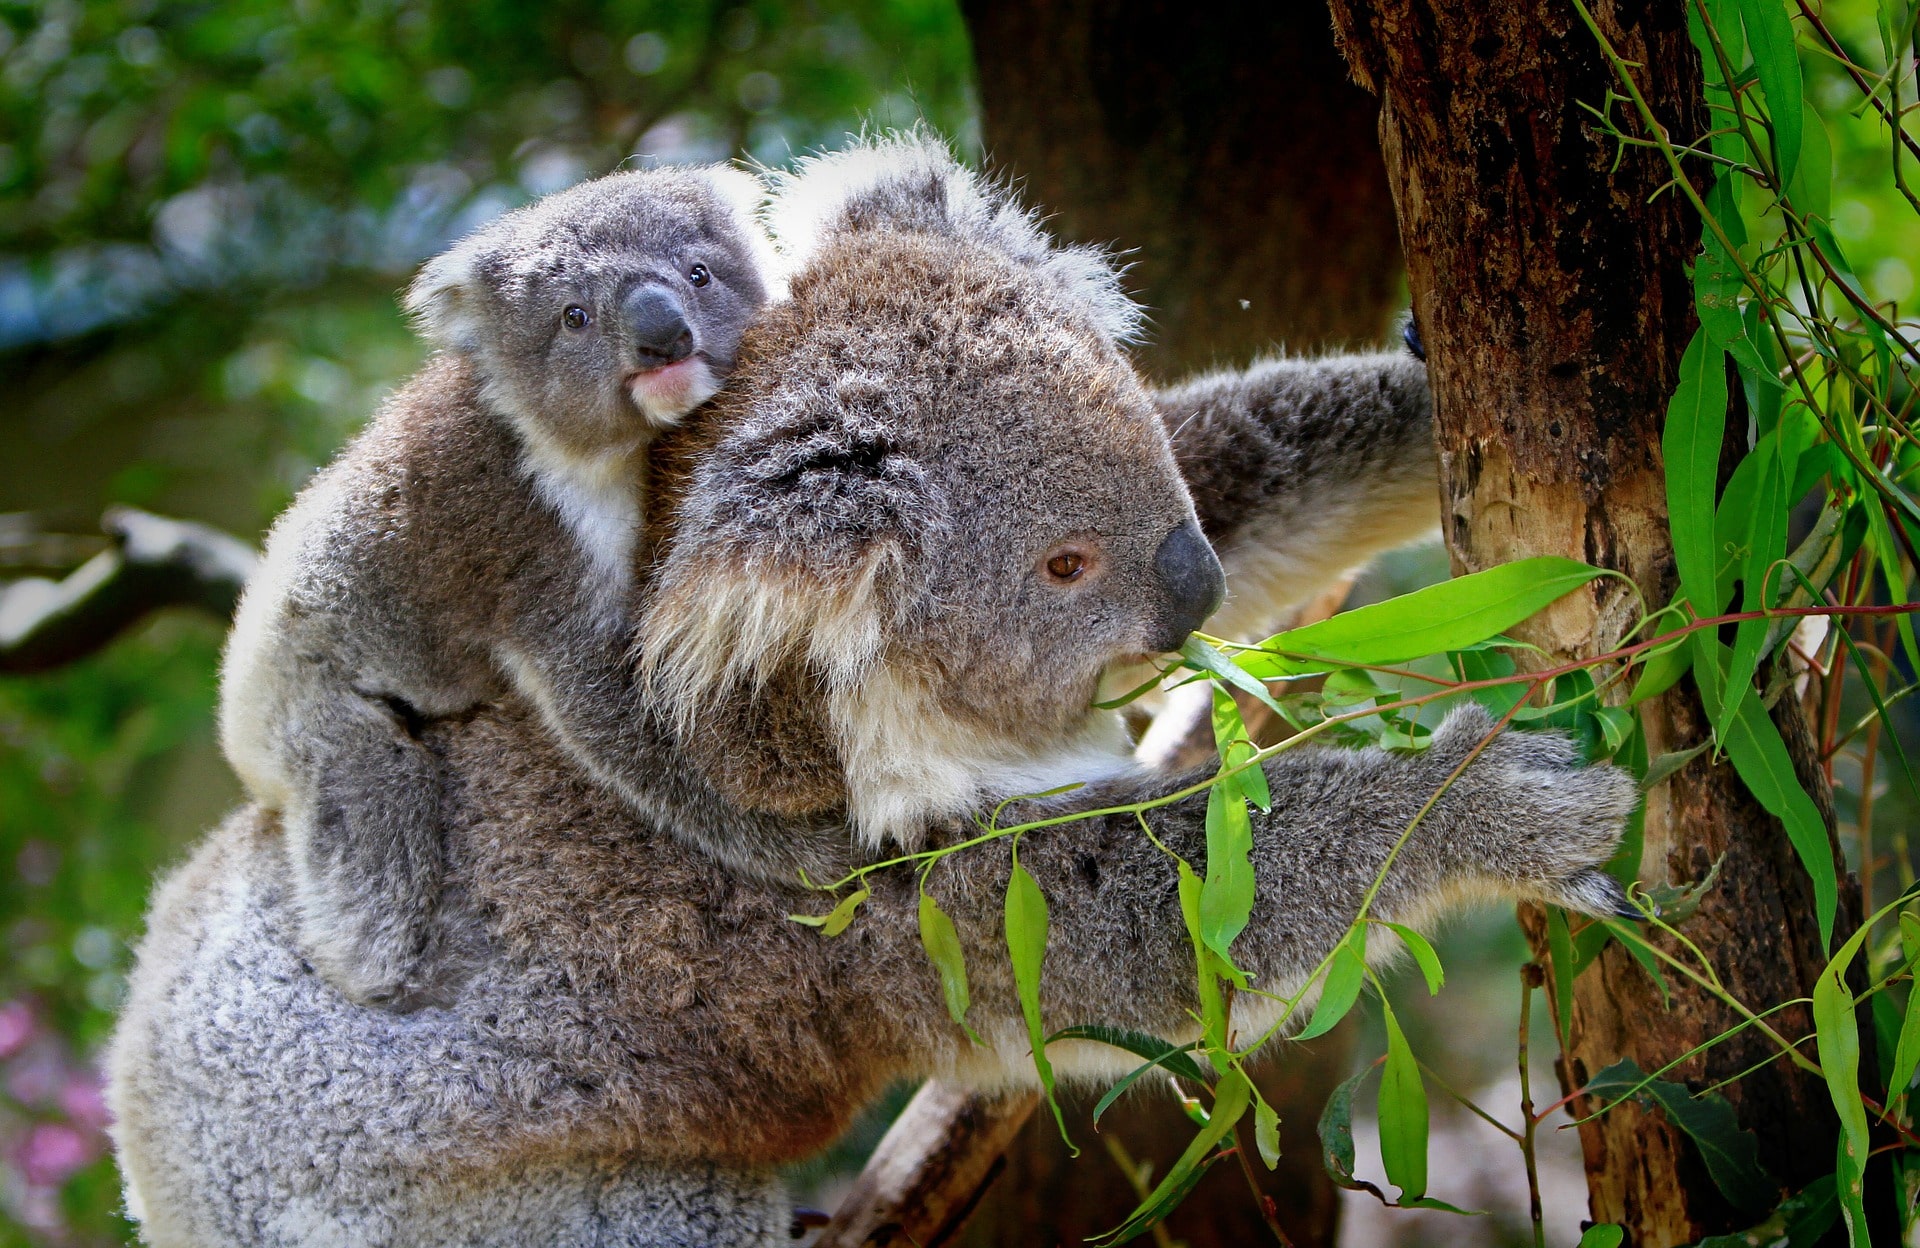 The Save the Koala Bill needs your support!